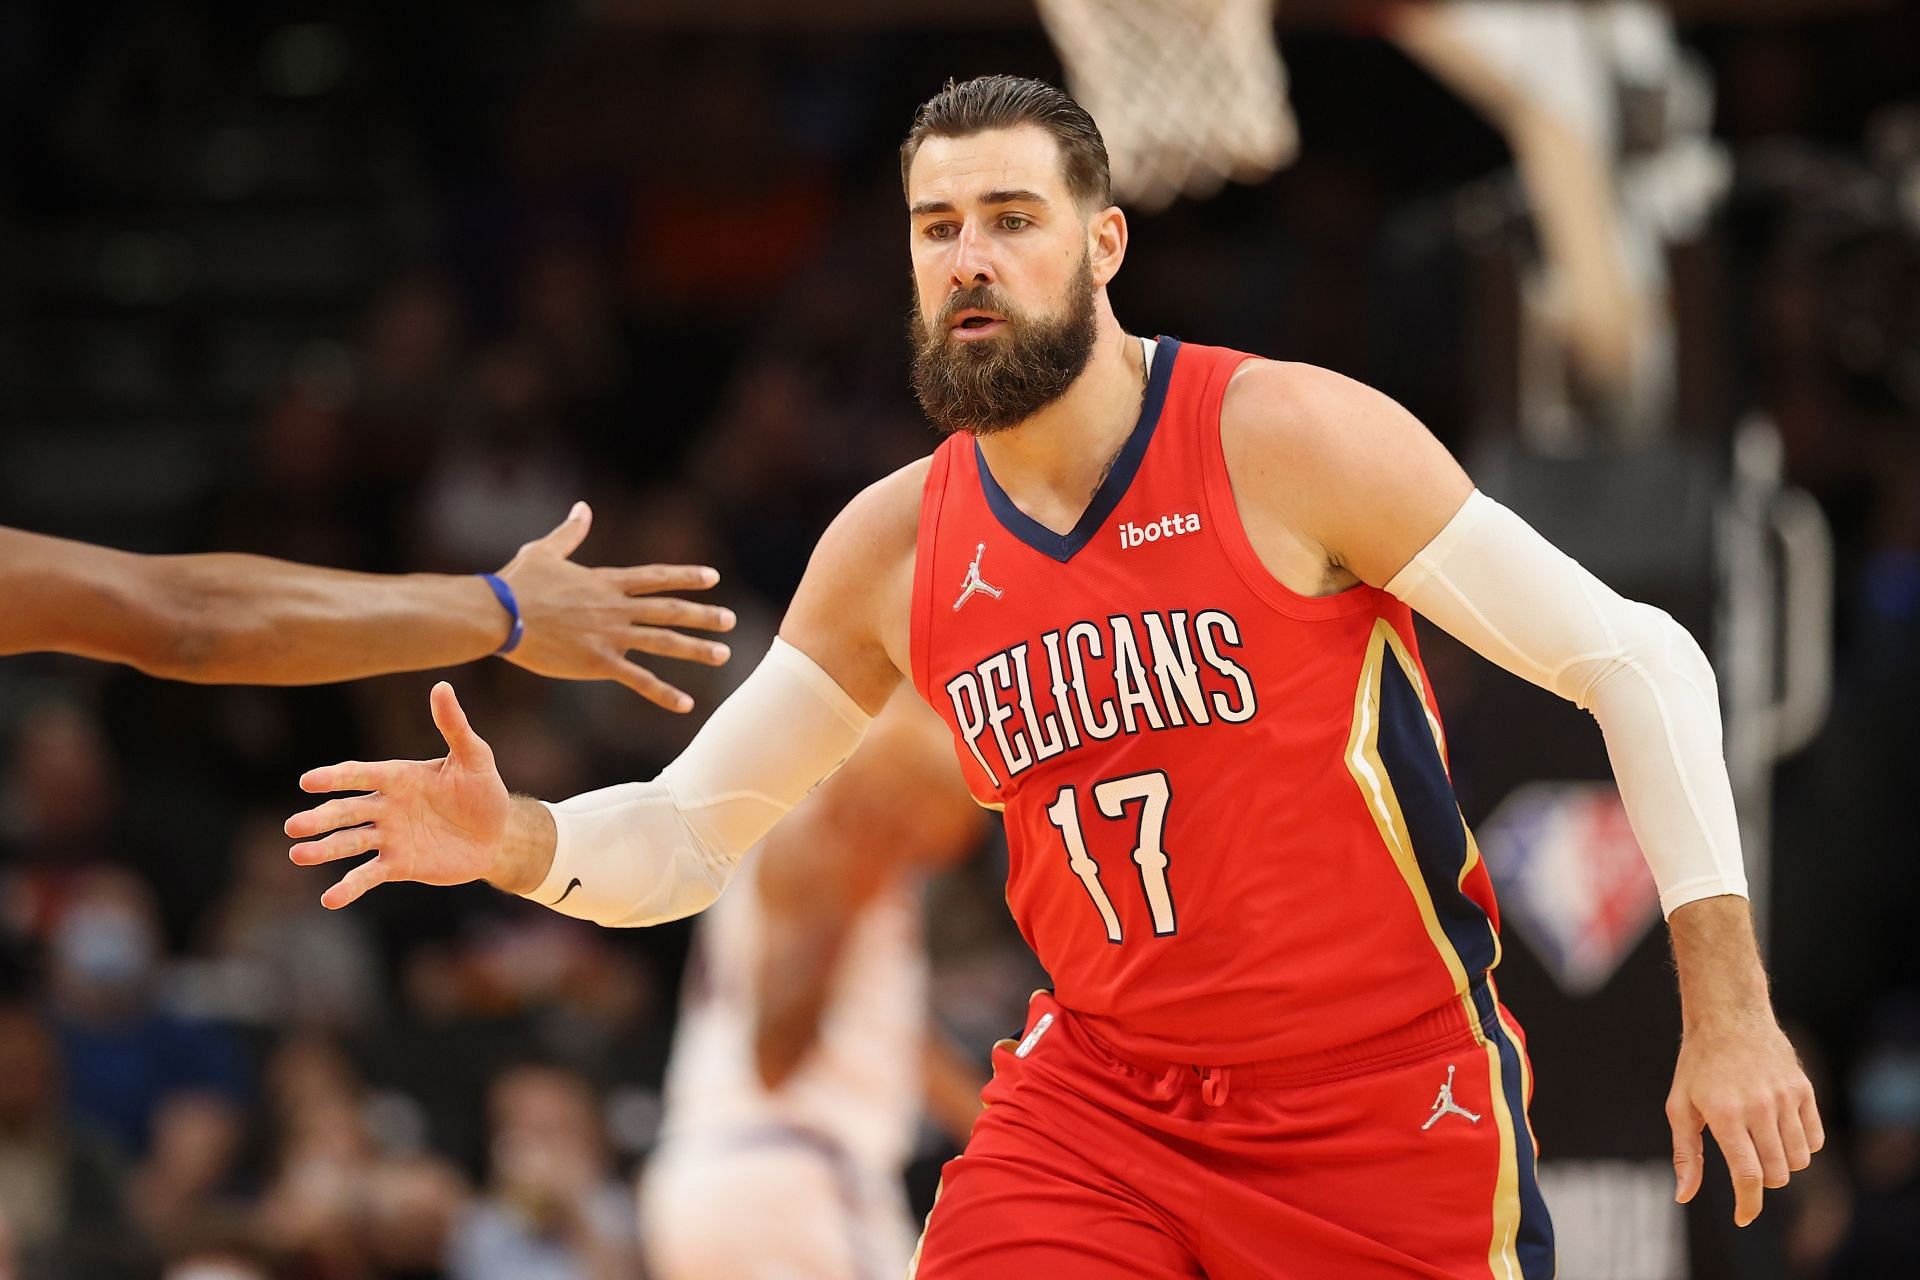 Jonas Valanciunas #17 of the New Orleans Pelicans high fives teammates after a three-point shot against the Phoenix Suns during the first half of the NBA game at Footprint Center on November 02, 2021 in Phoenix, Arizona.